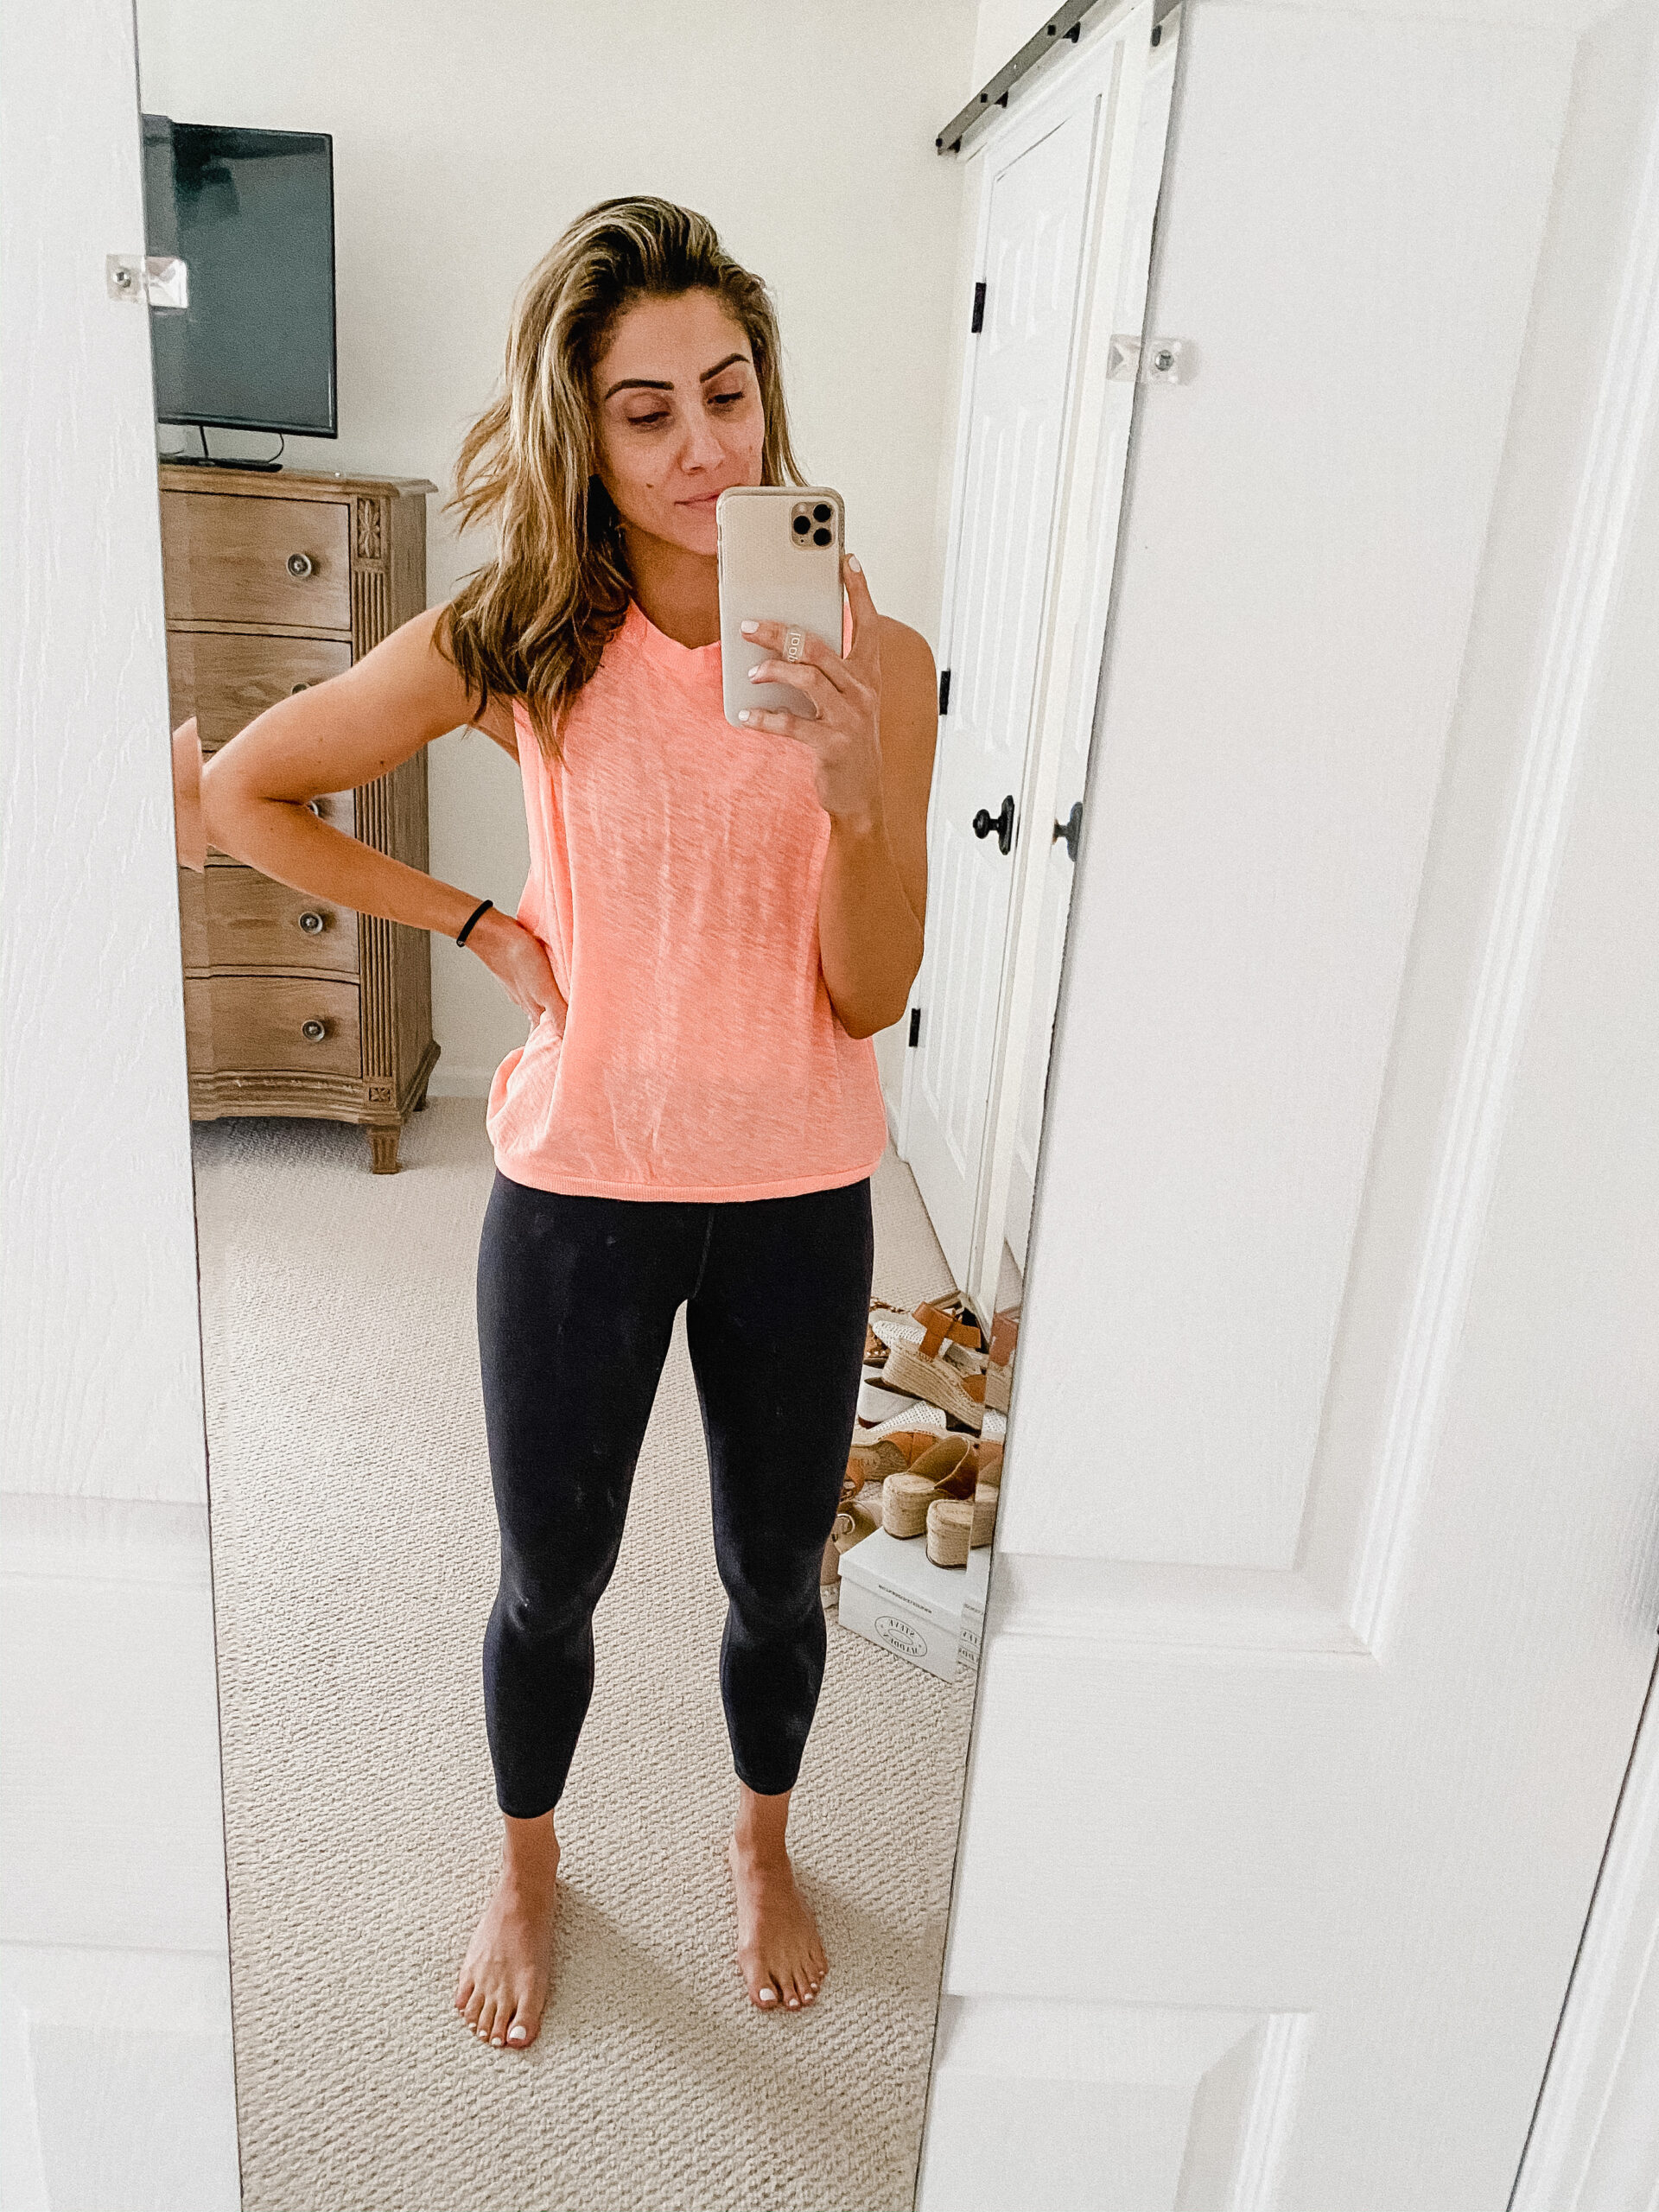 Connecticut life and style blogger Lauren McBride shares a round up of athletic wear, featuring Athleta, Free People, and Fabletics.